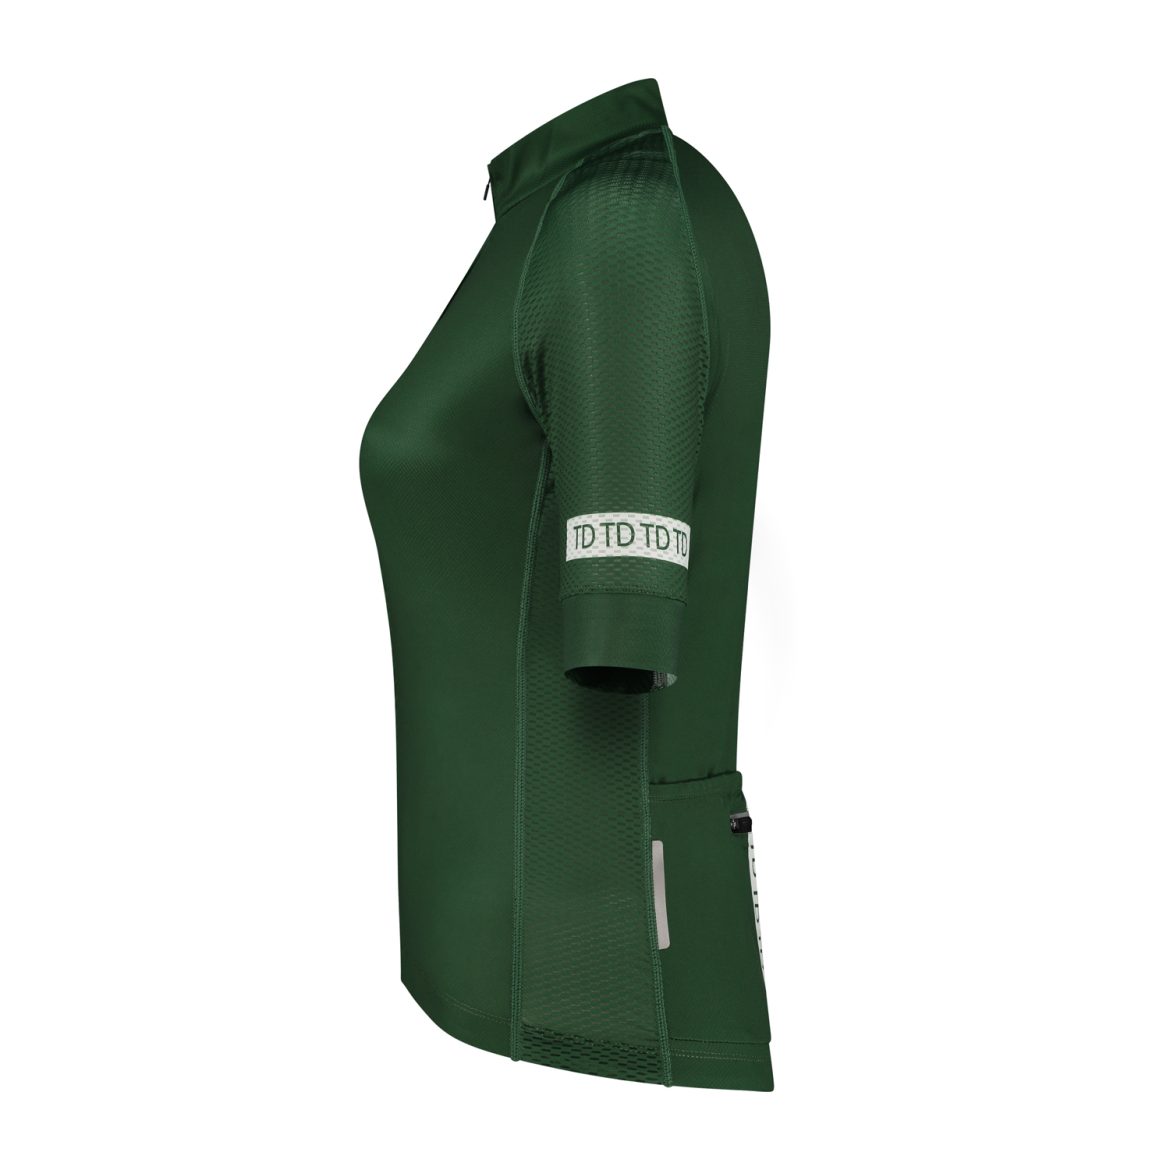 Cycling jersey side view with dark green color, women's sizing and TD grippers